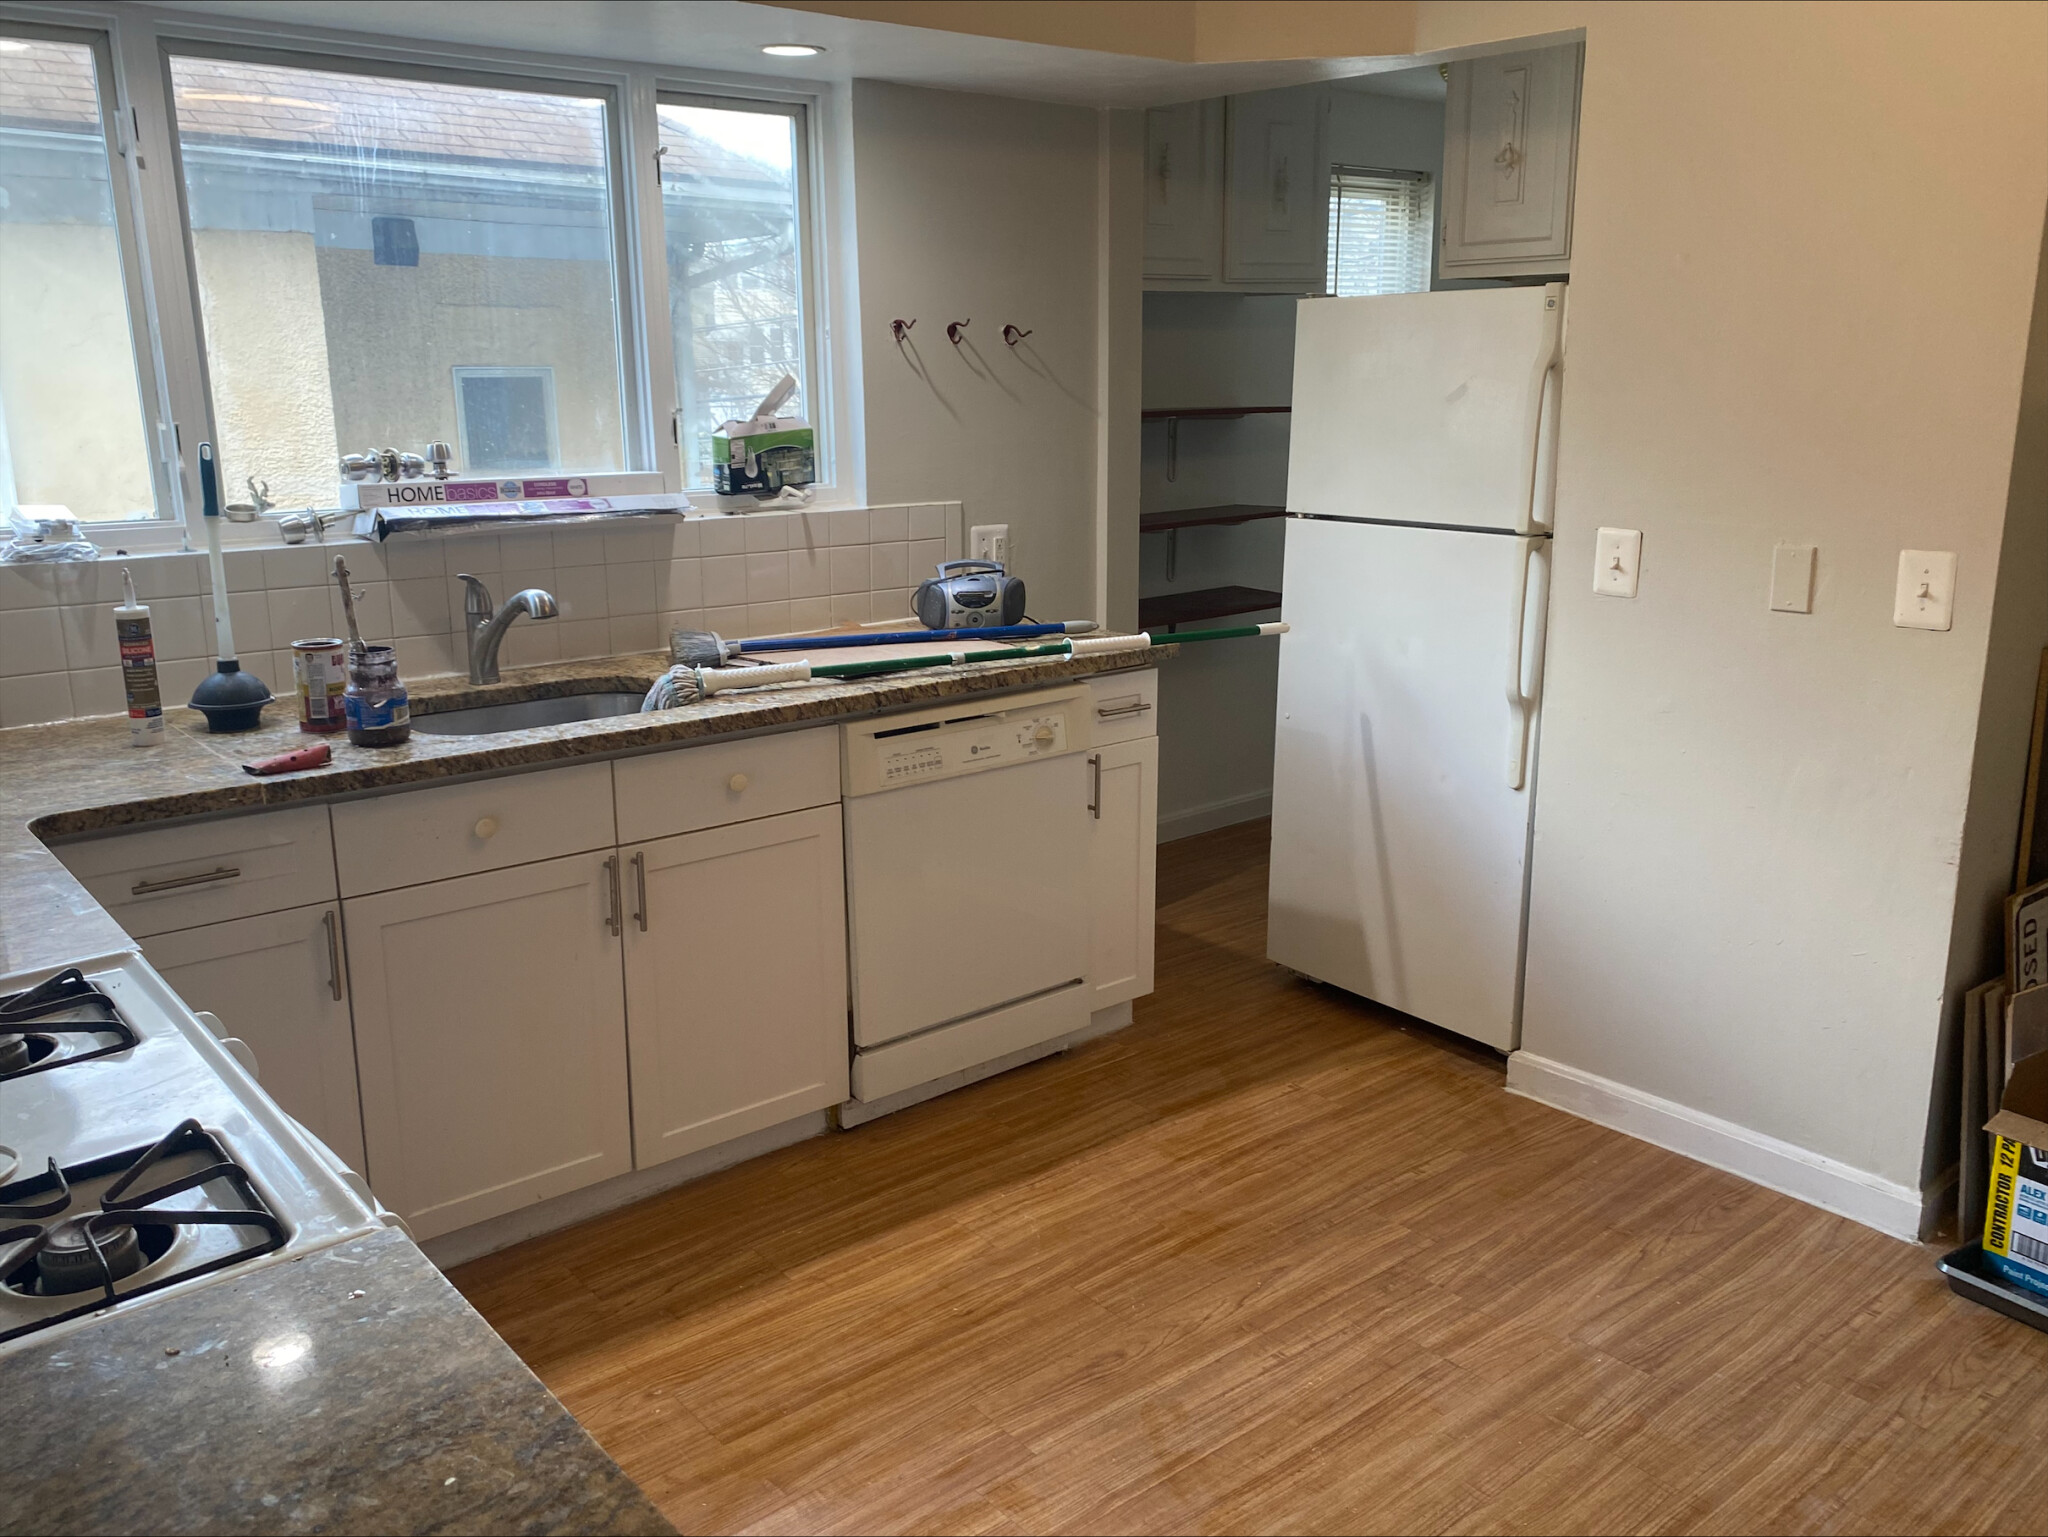 Photos of apartment on Alewife Brook Pkwy.,Somerville MA 02144